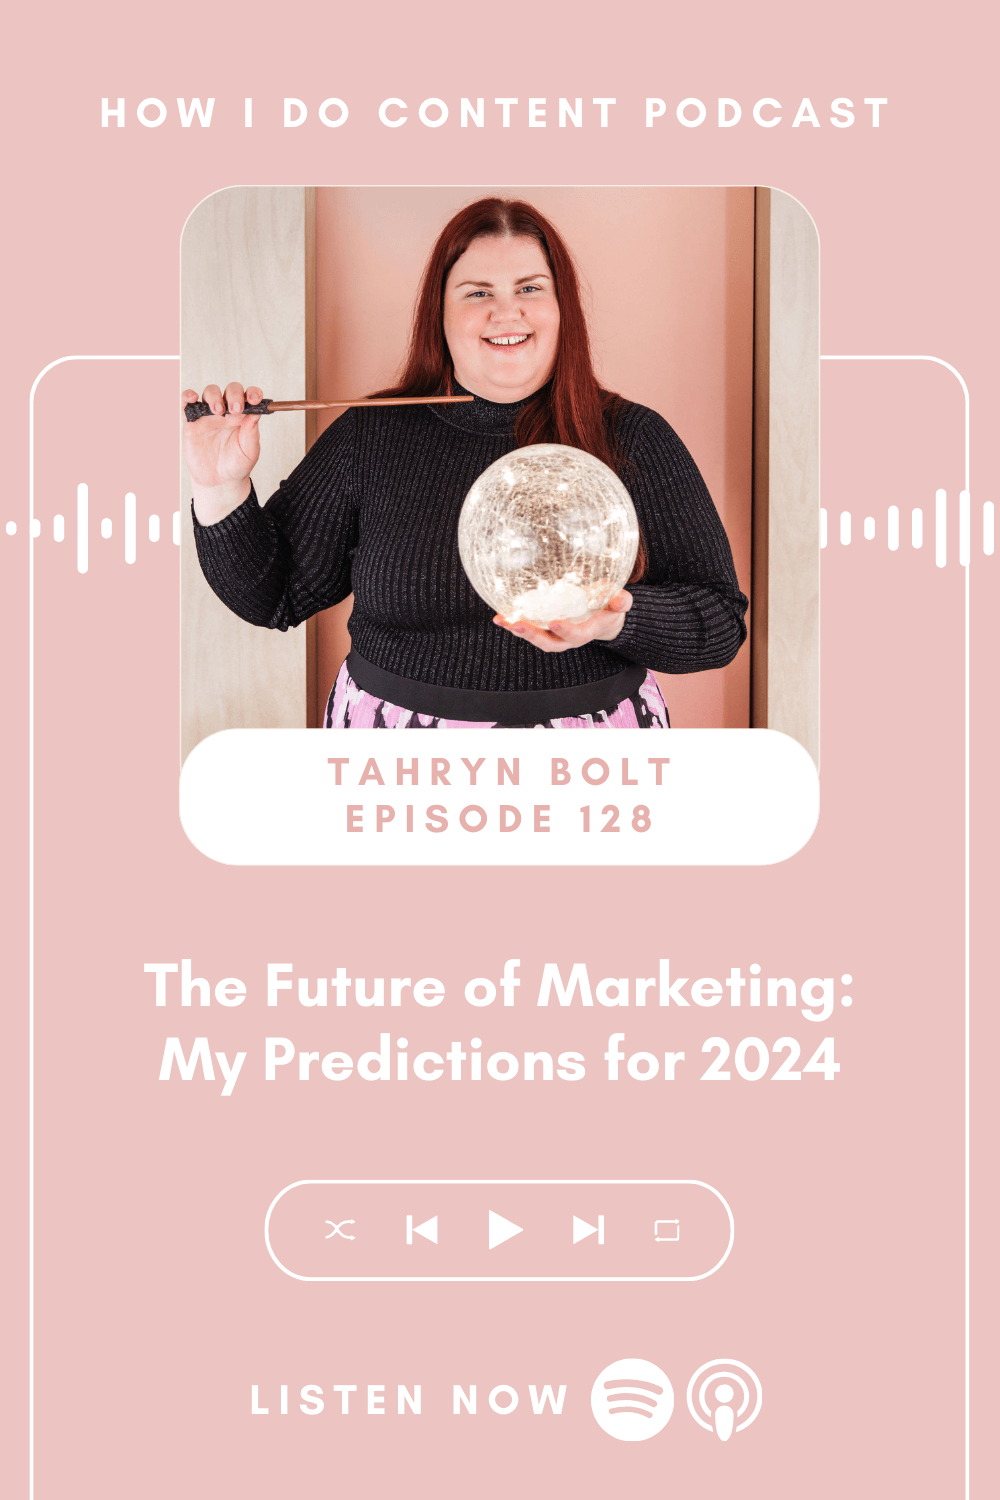 The Future of Marketing: My Predictions for 2024